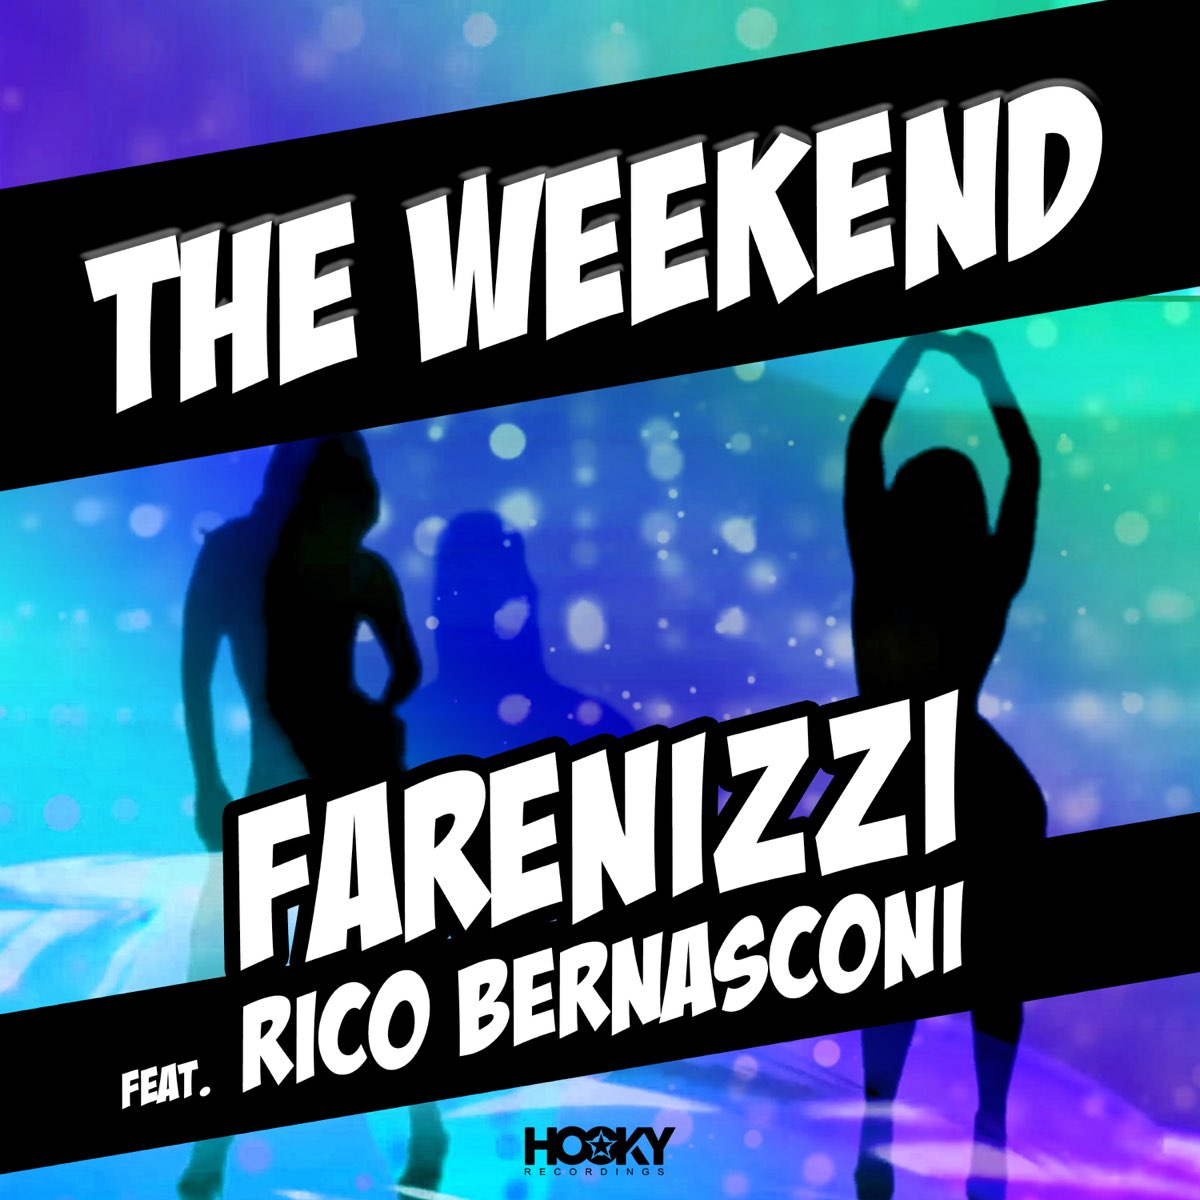 The weekend feat. Gary caos feat Rico Bernasconi. Gary caos feat Rico Bernasconi Party people.